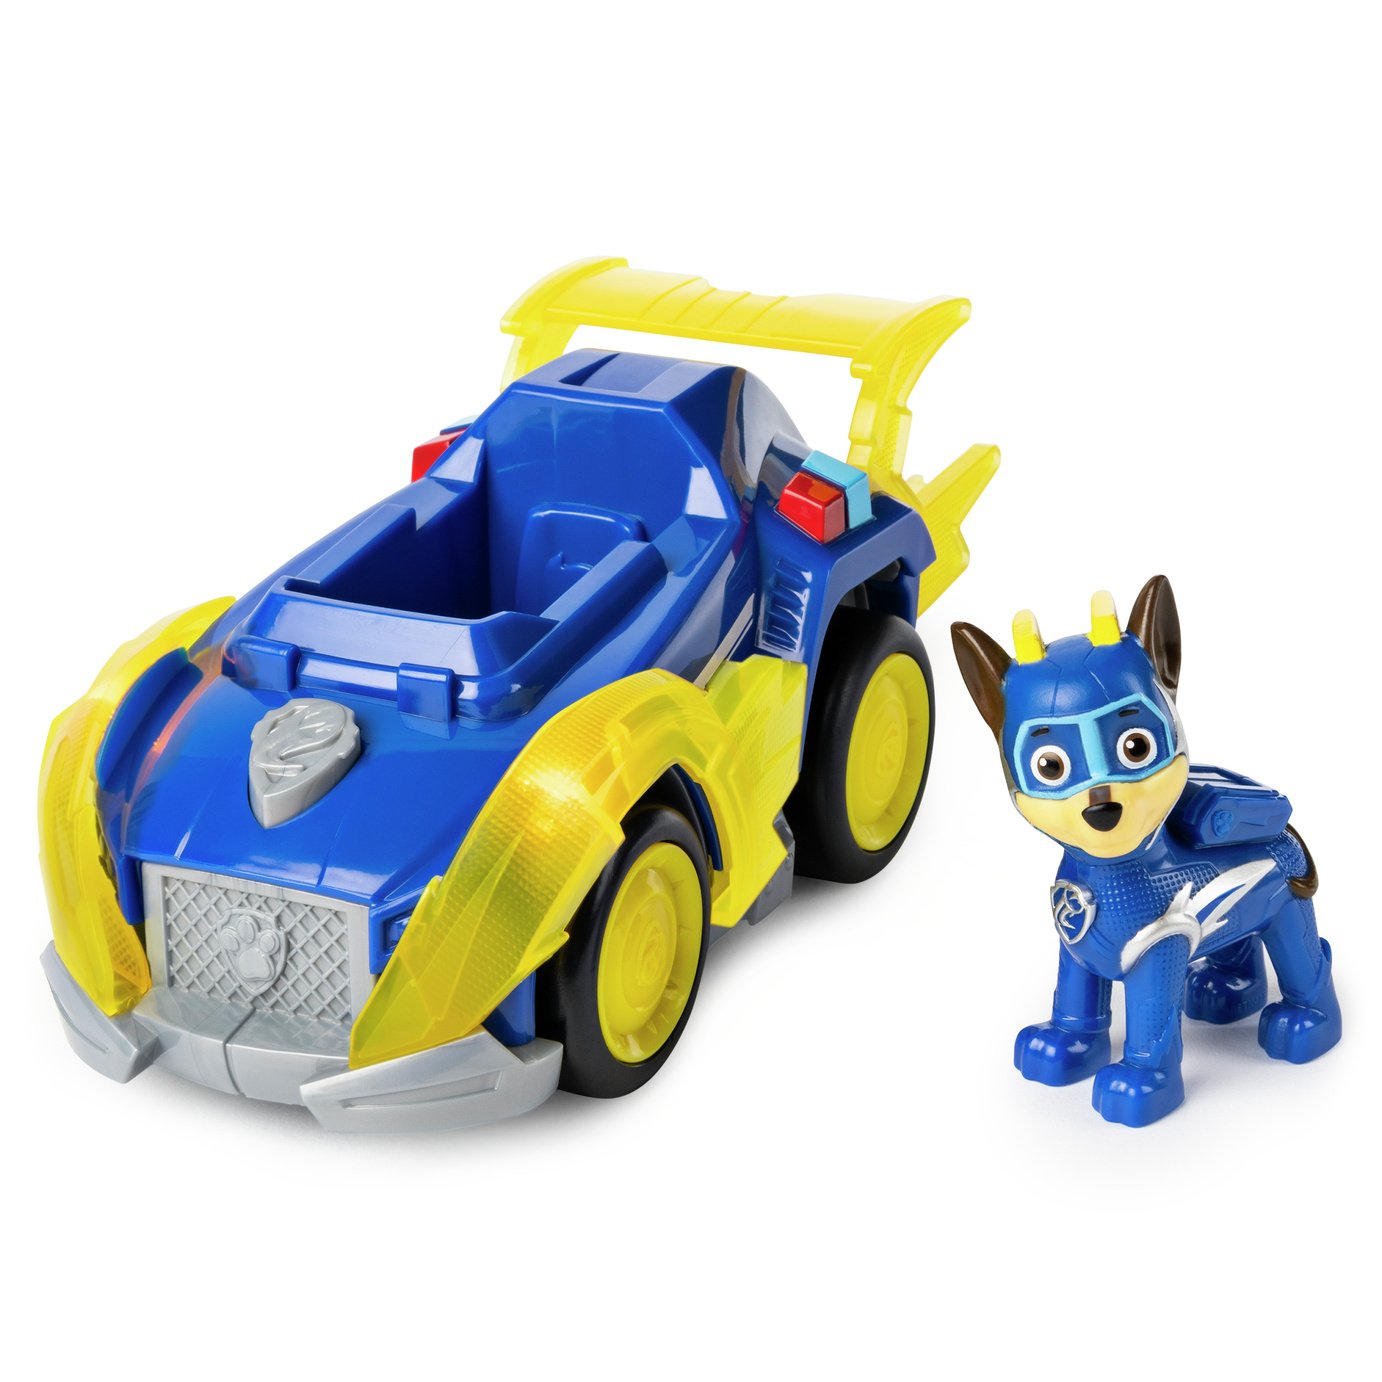 paw patrol police rescue deluxe